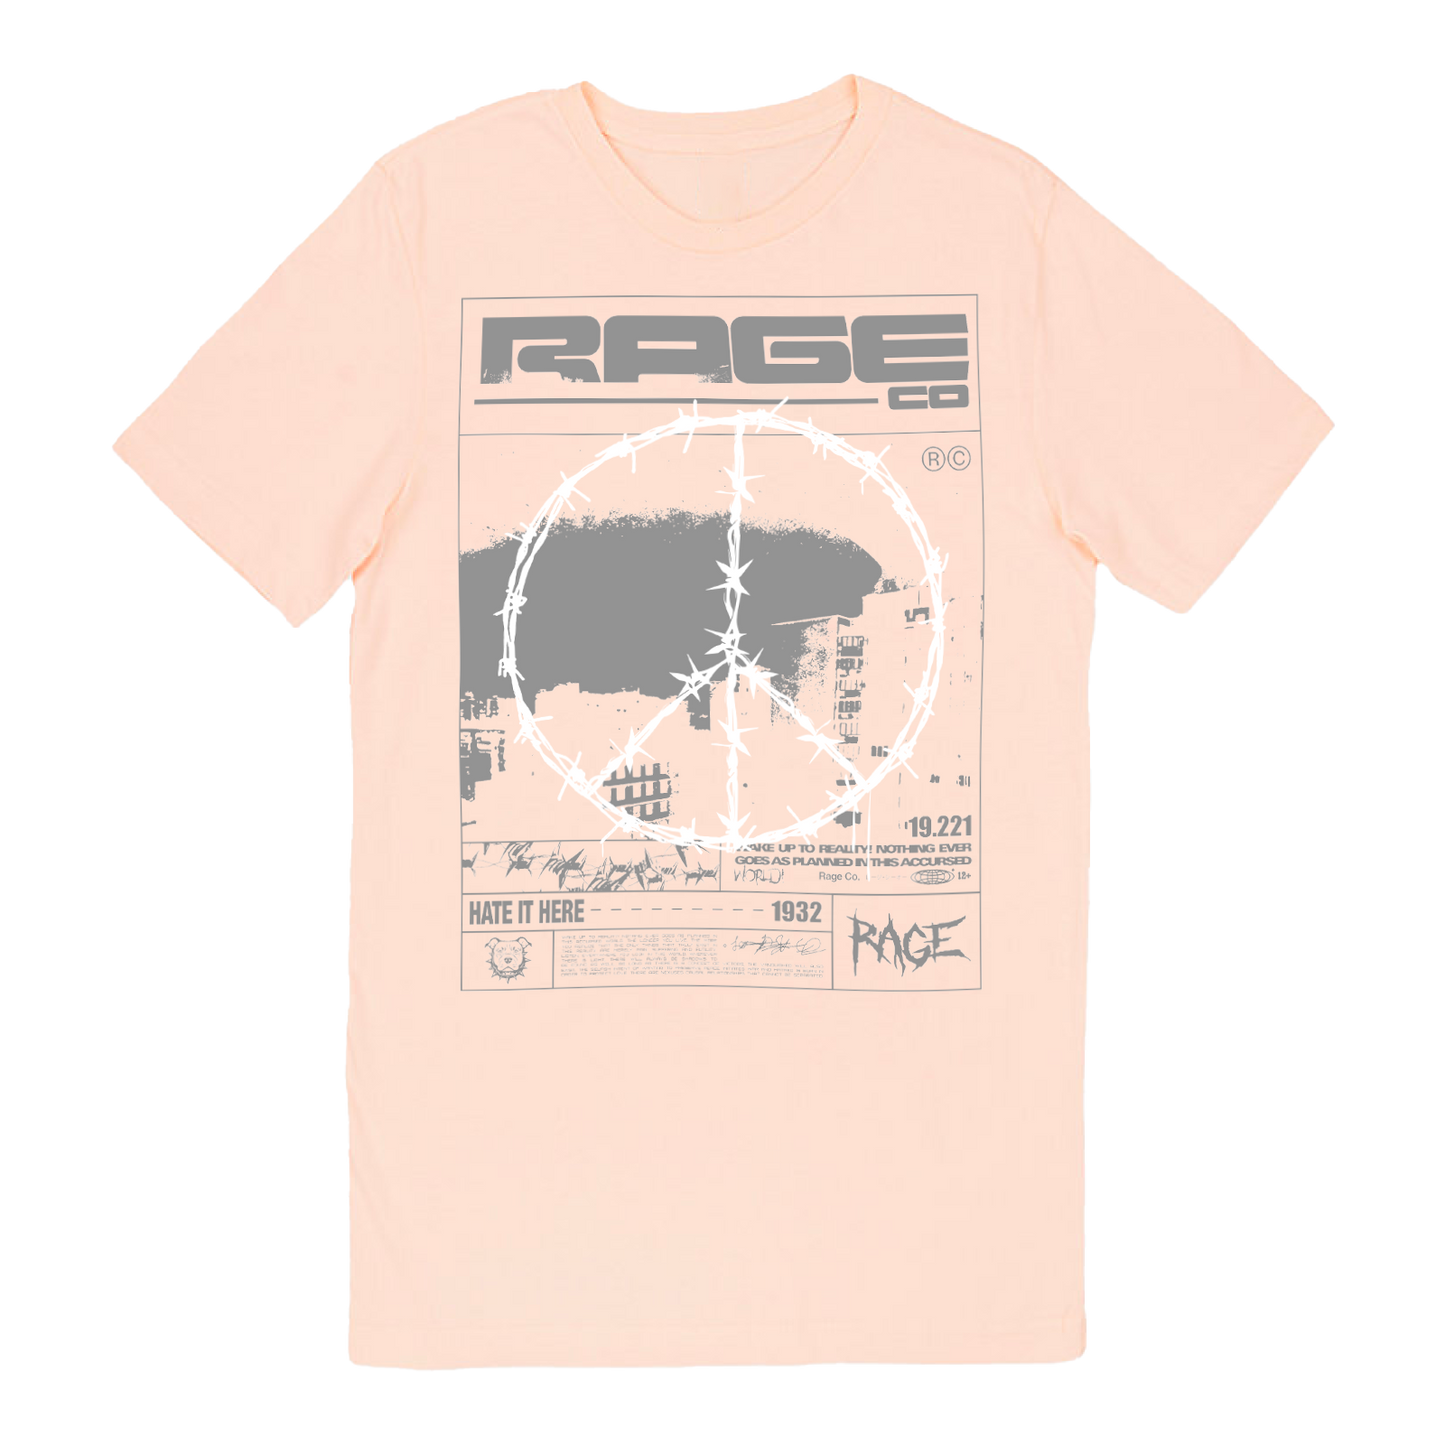 Wired Tee